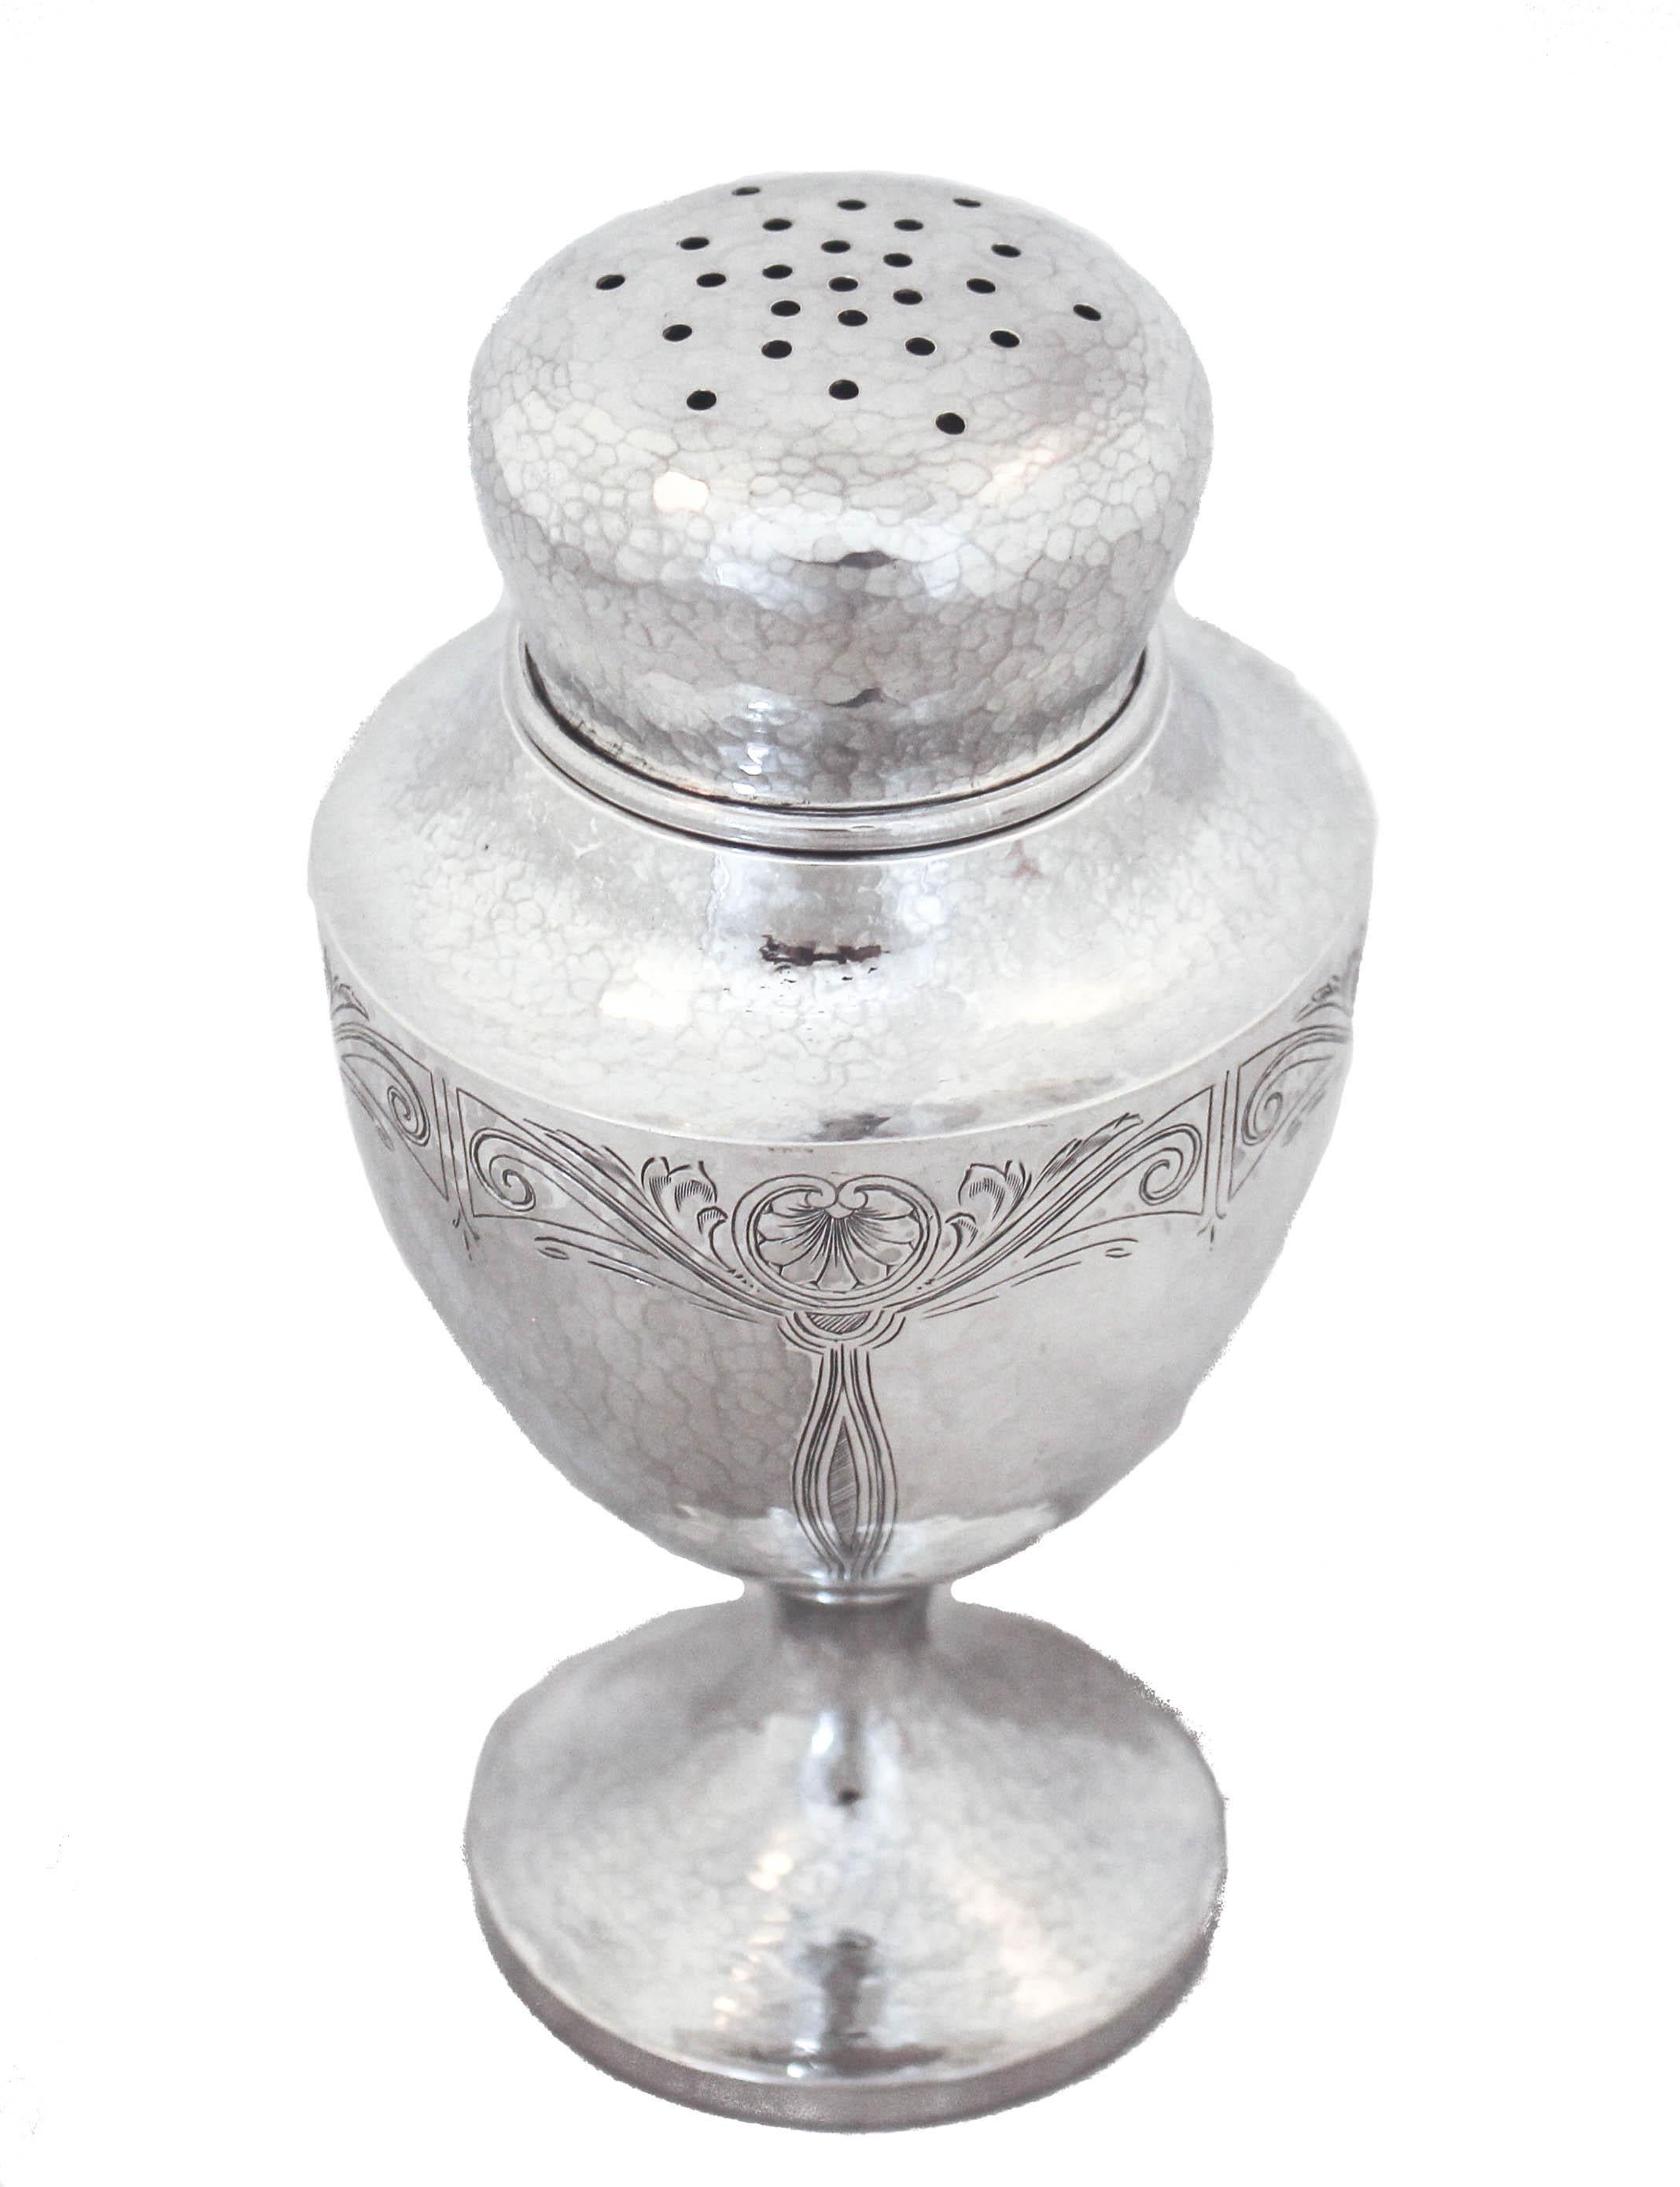 This sterling silver sugar caster is hand hammered and has an etched design around the body. This style is called Arts and Crafts. The core characteristics of the Arts and Crafts movement are a belief in craftsmanship which stresses the inherent